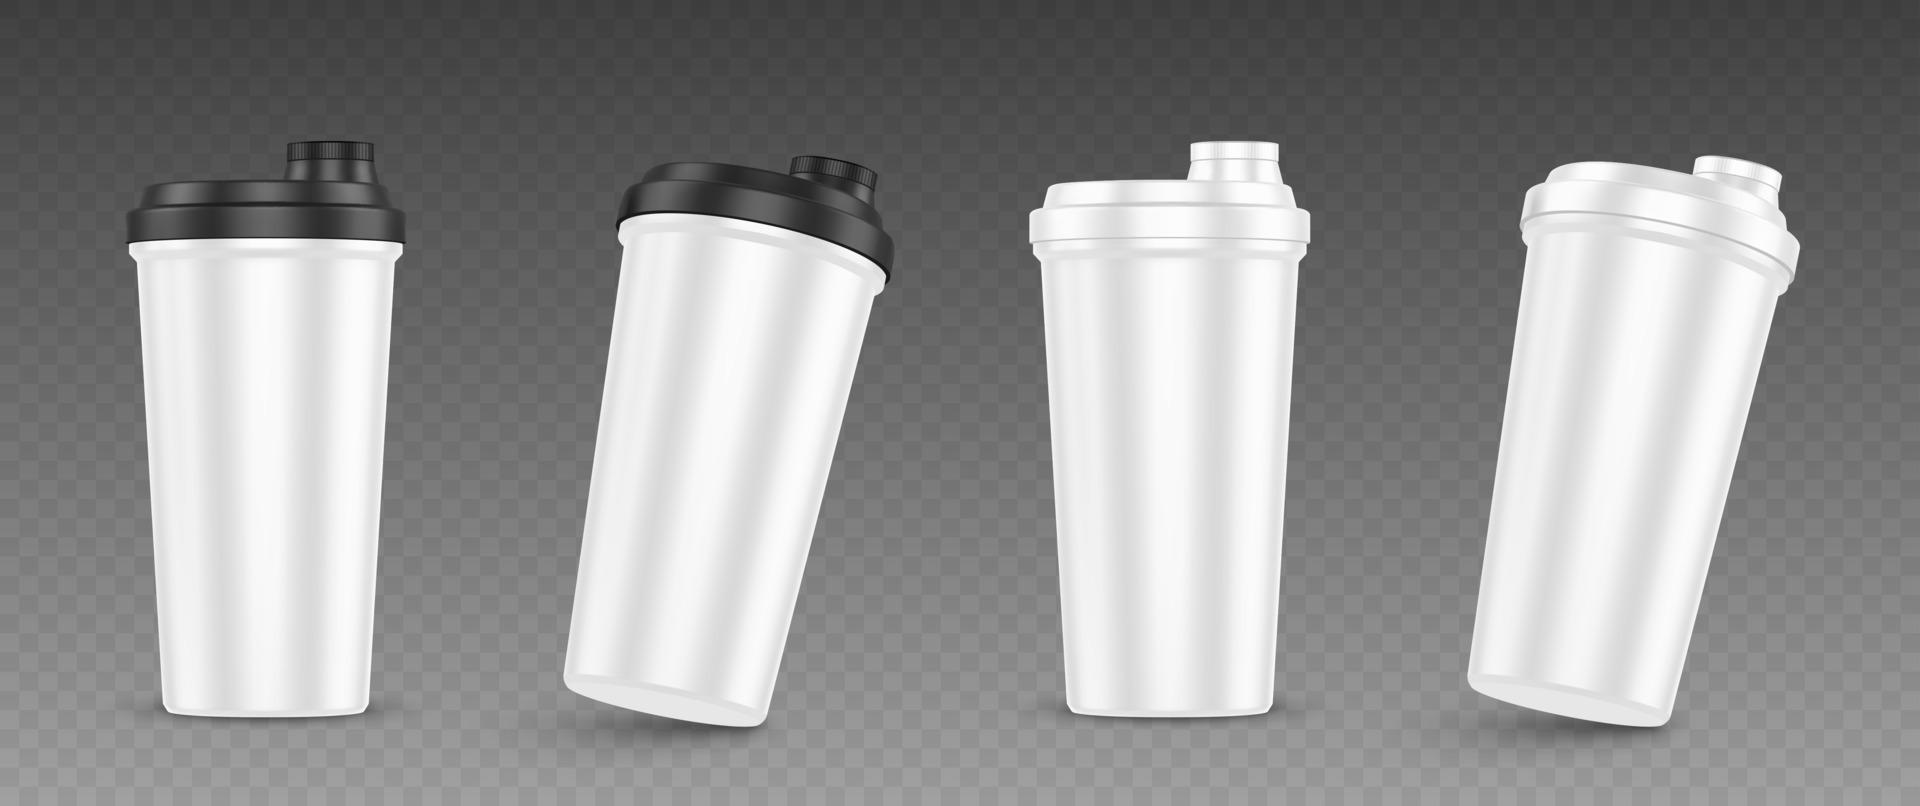 Protein shaker, cup for sports nutrition, mockup vector